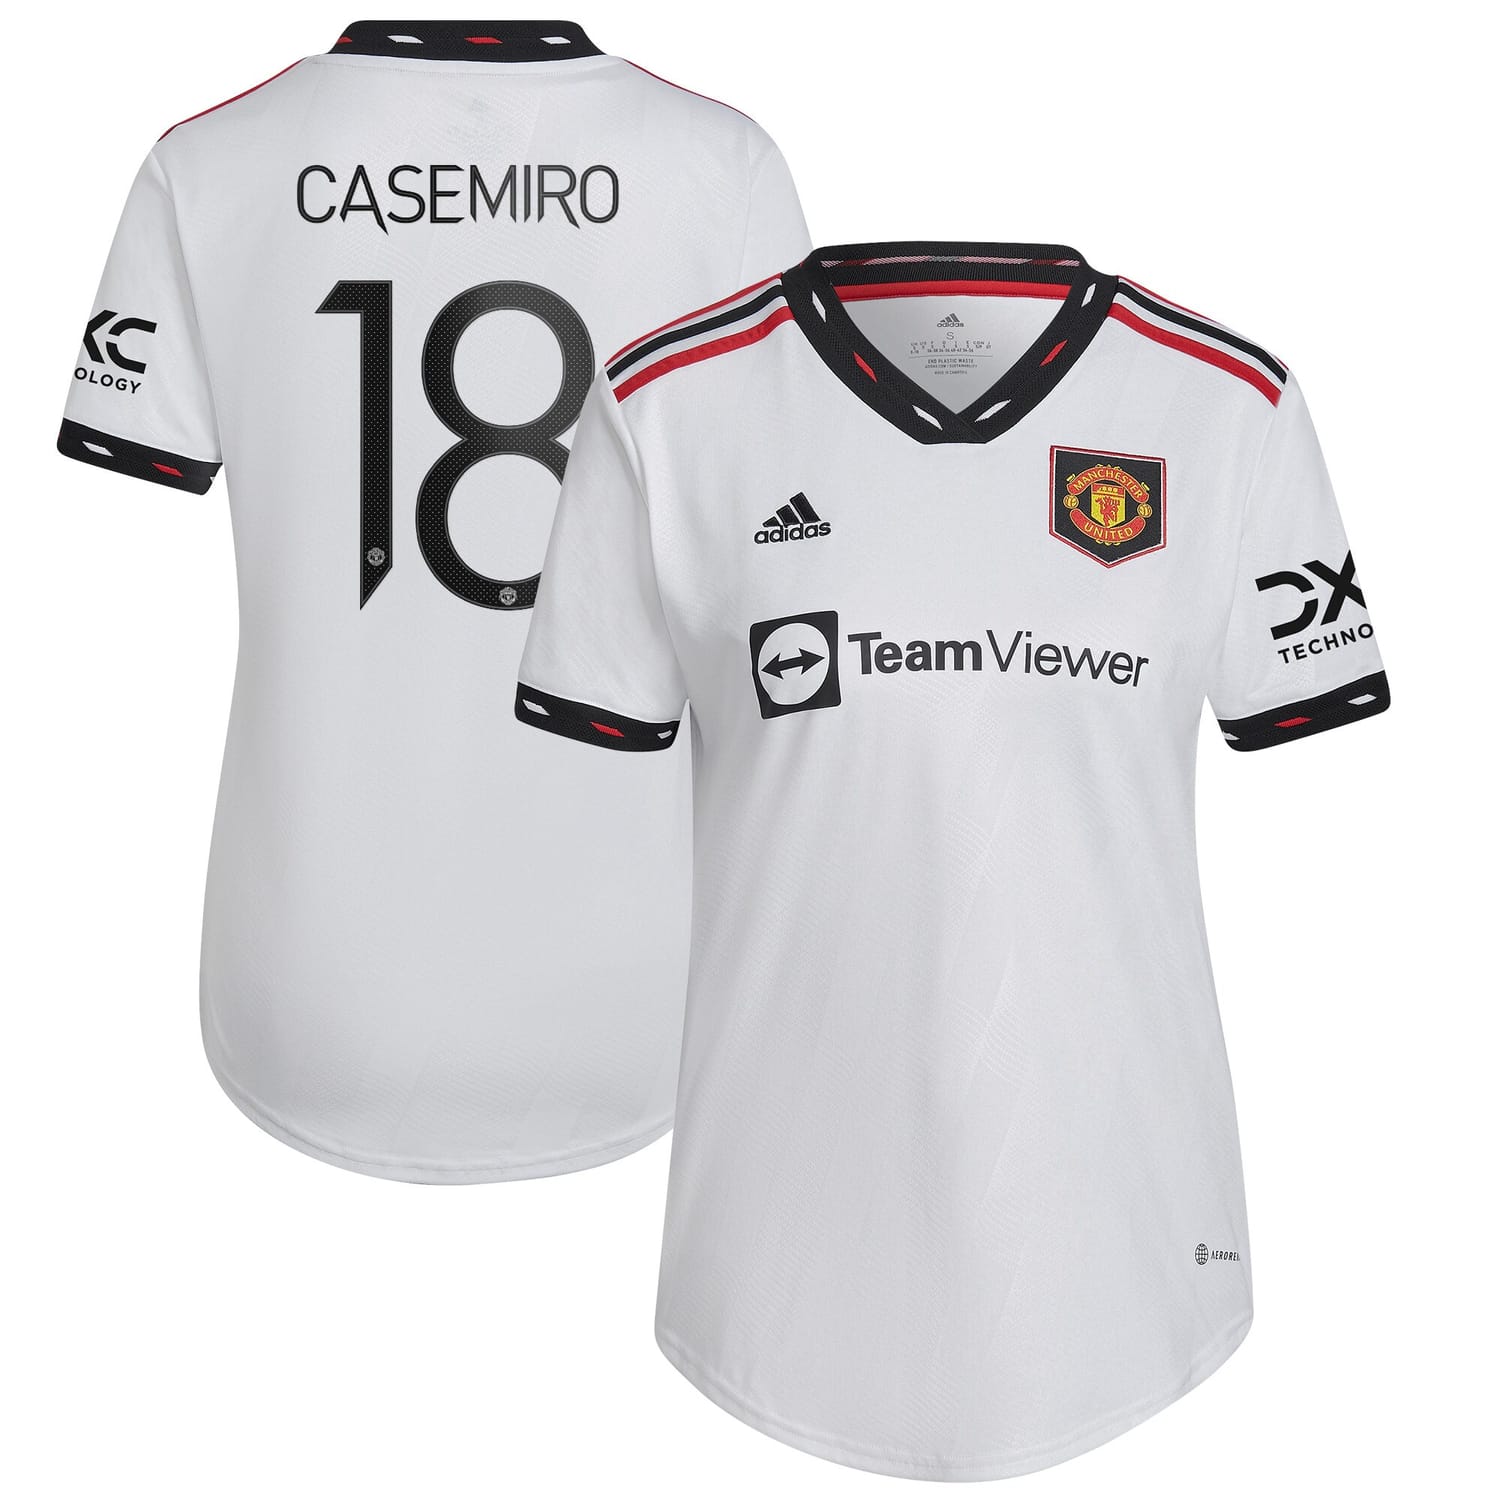 Premier League Manchester United Away Cup Jersey Shirt 2022-23 player Carlos Casemiro 18 printing for Women